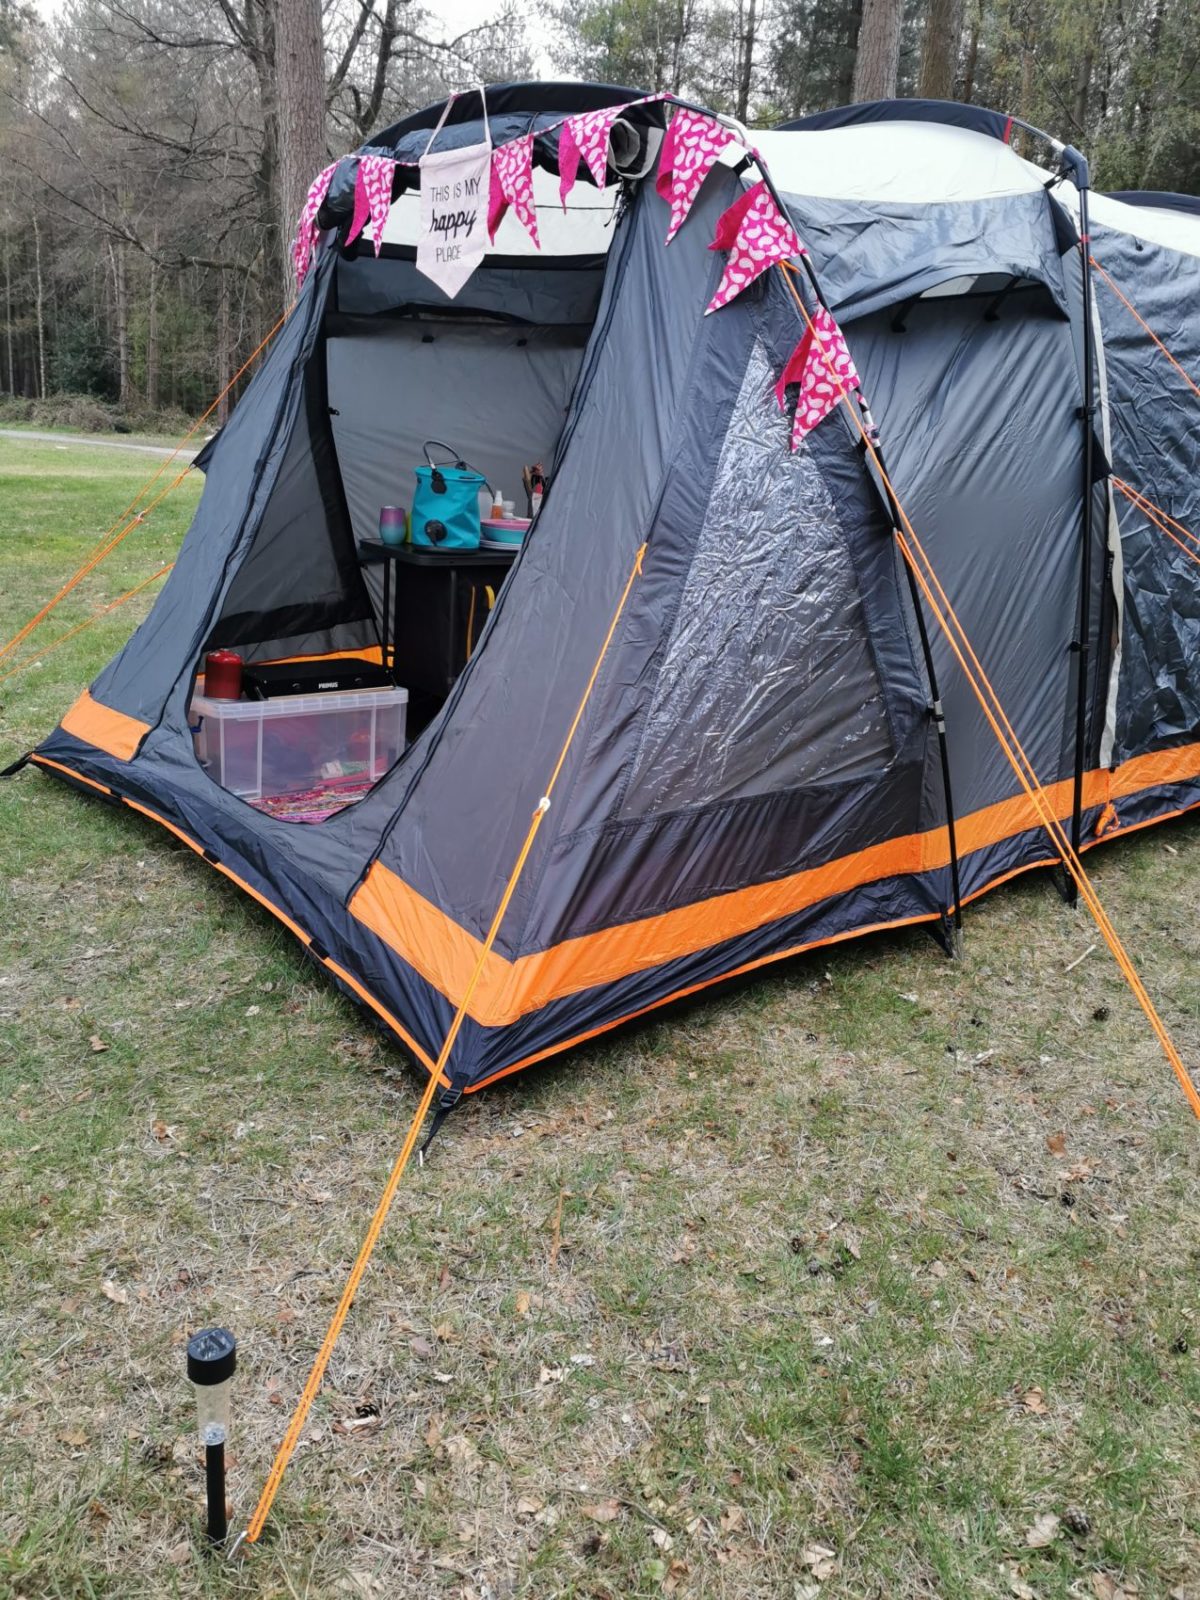 OLPRO Orion 6 family tent review